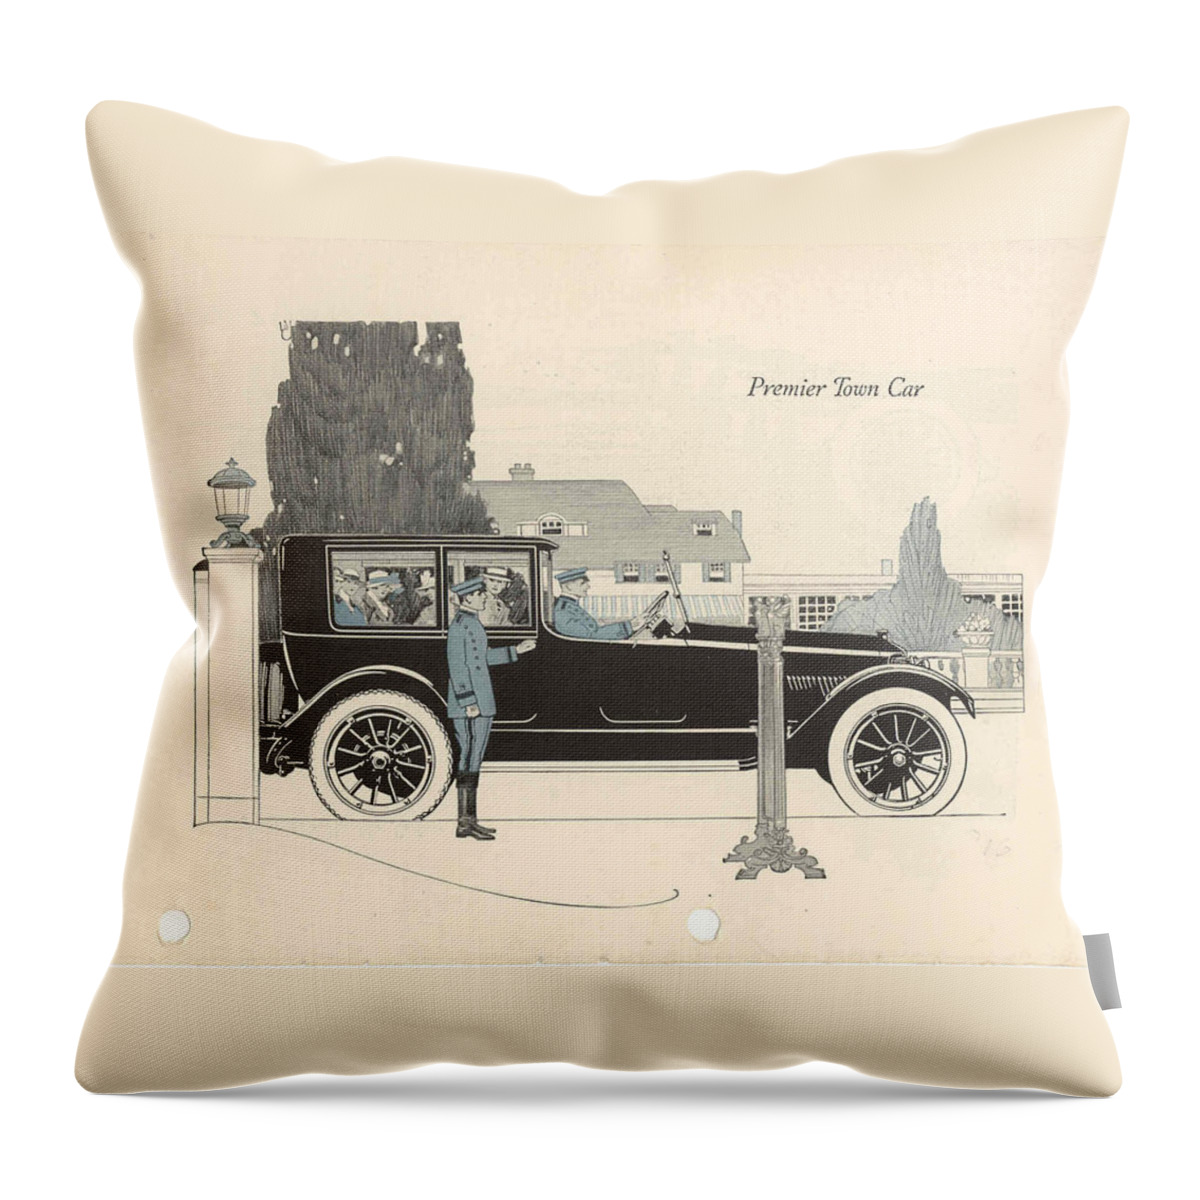 1917 Premier Town Car Throw Pillow featuring the painting 1917 Premier Town Car by MotionAge Designs